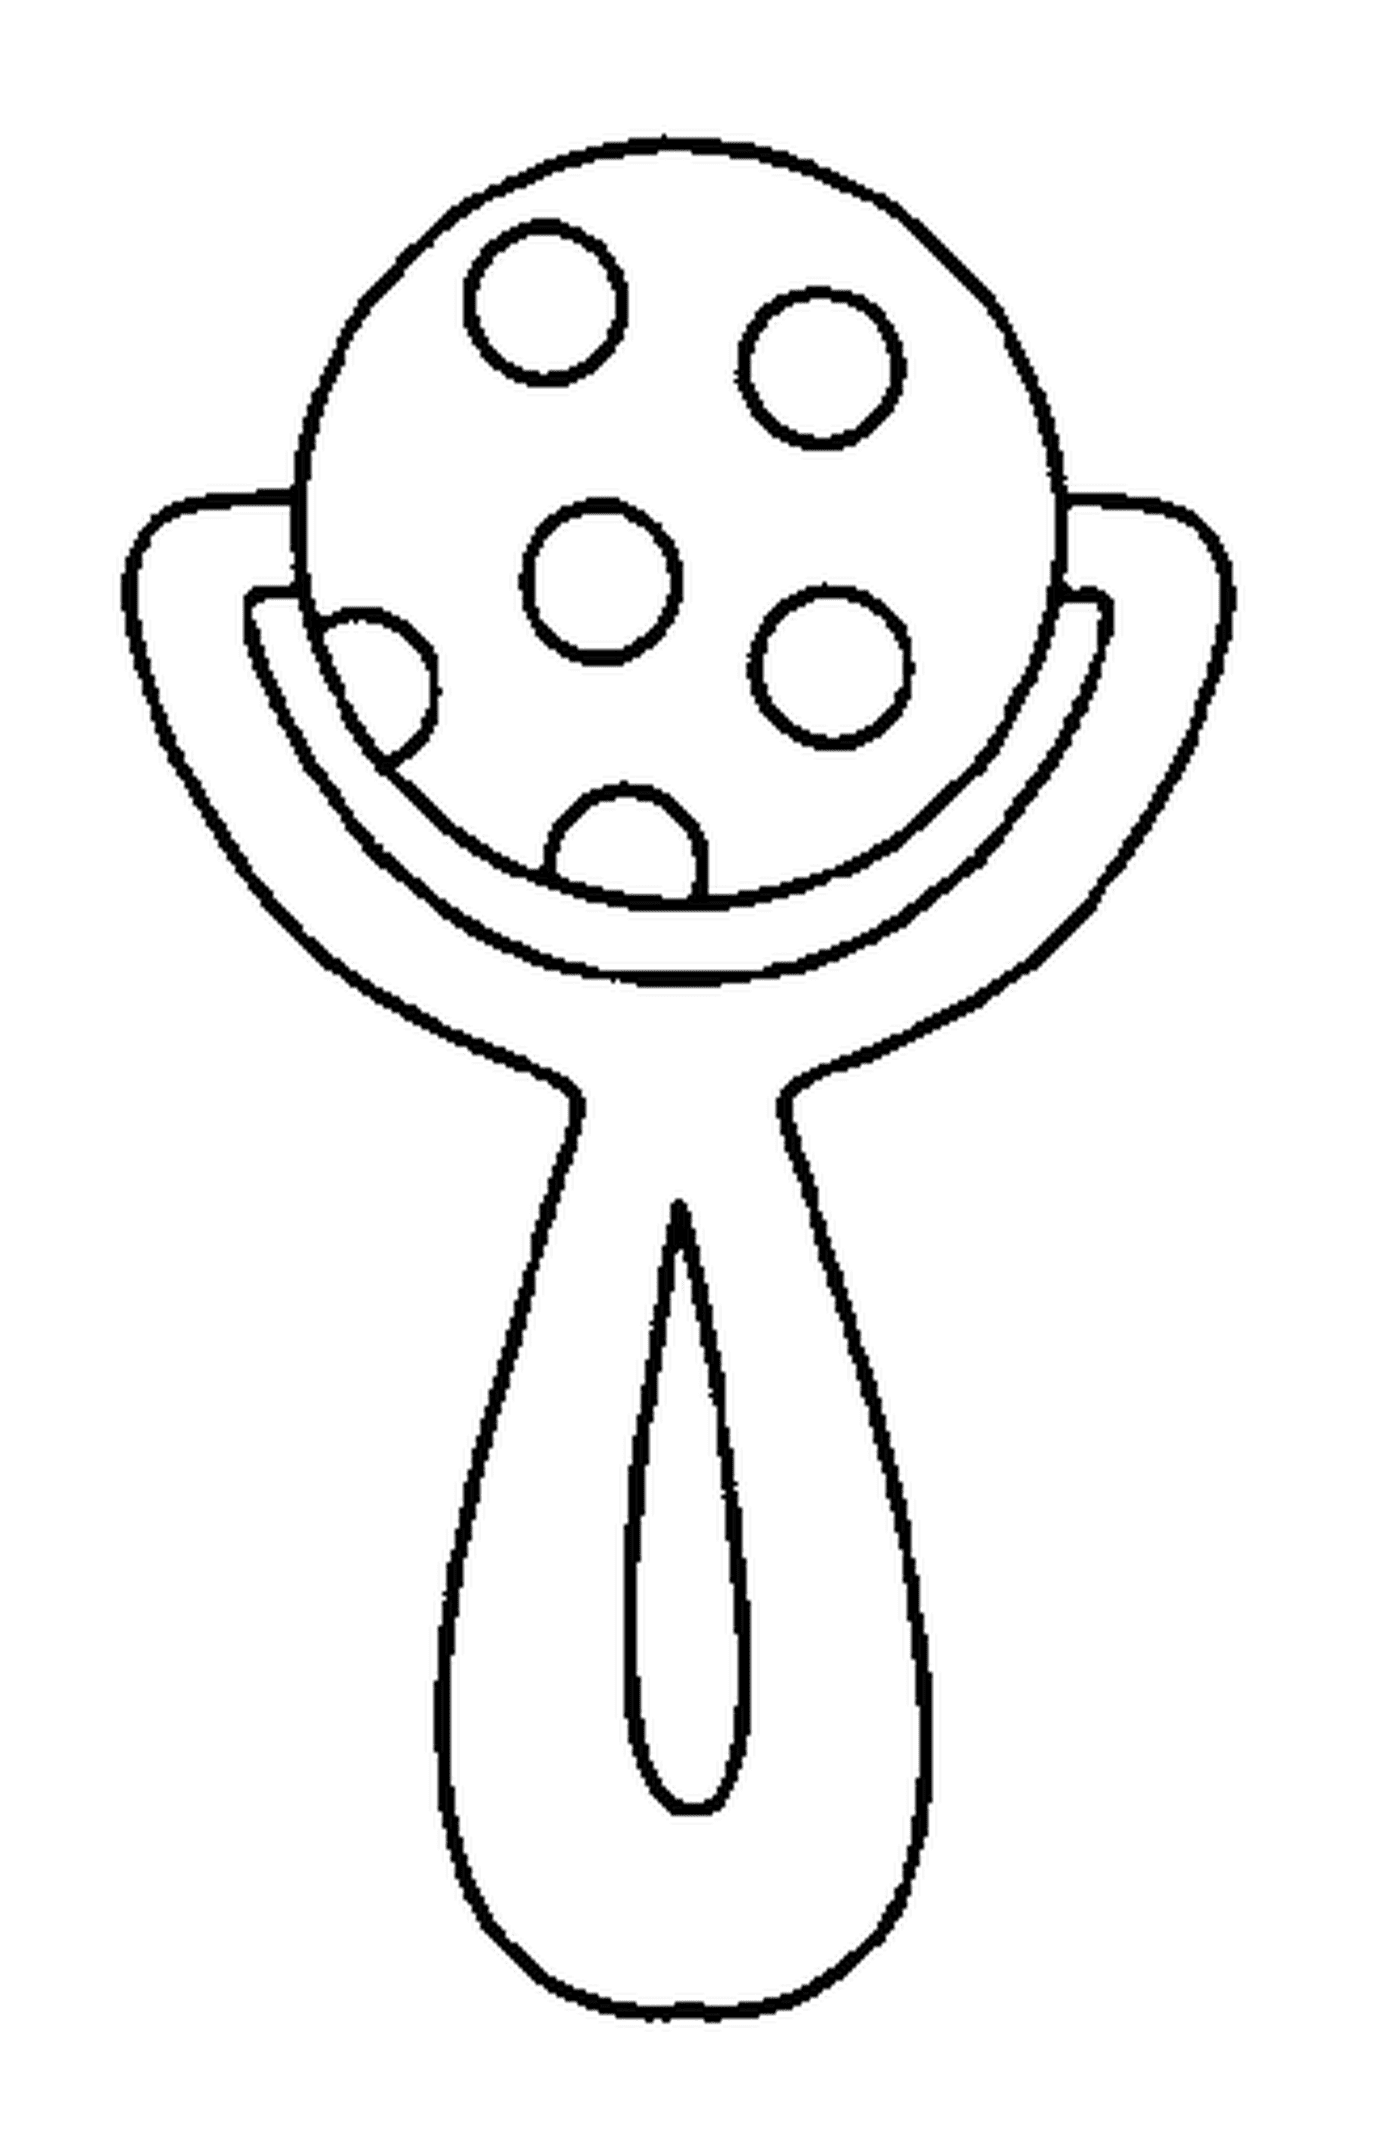  A person holding a rattle 